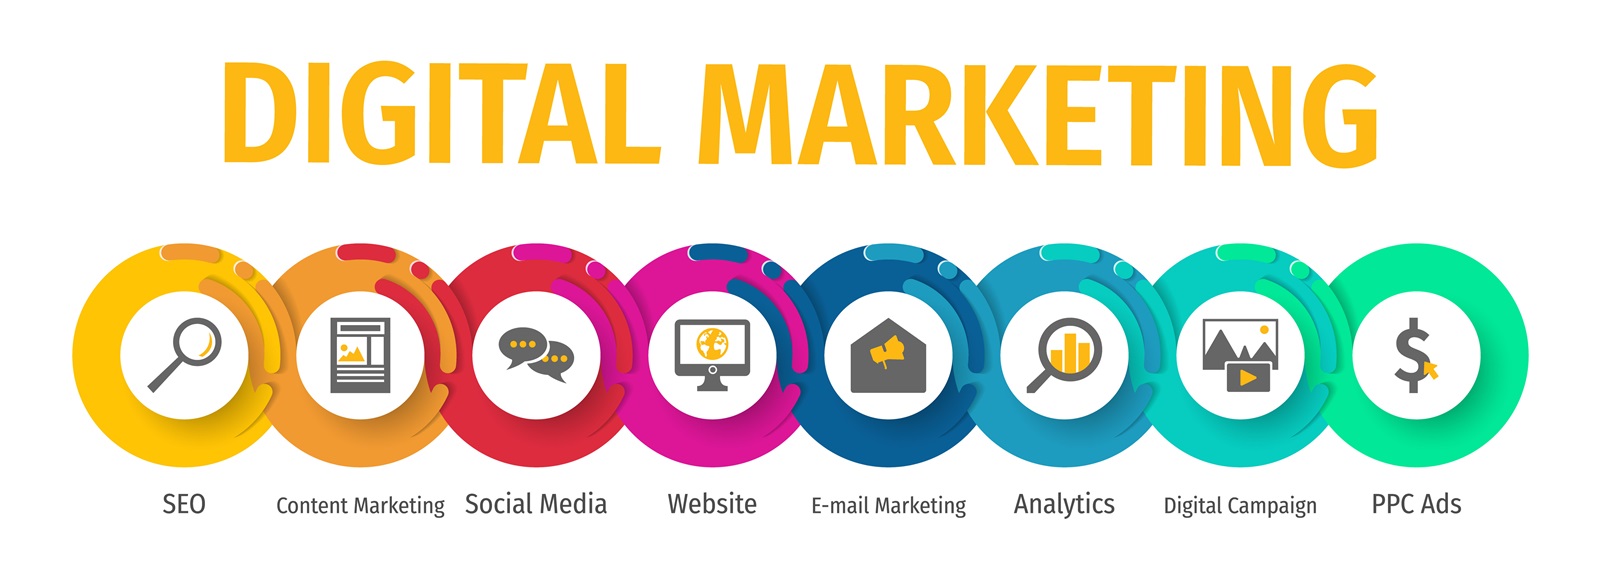 4 Secrets To Creating An Effective Digital Marketing Strategy